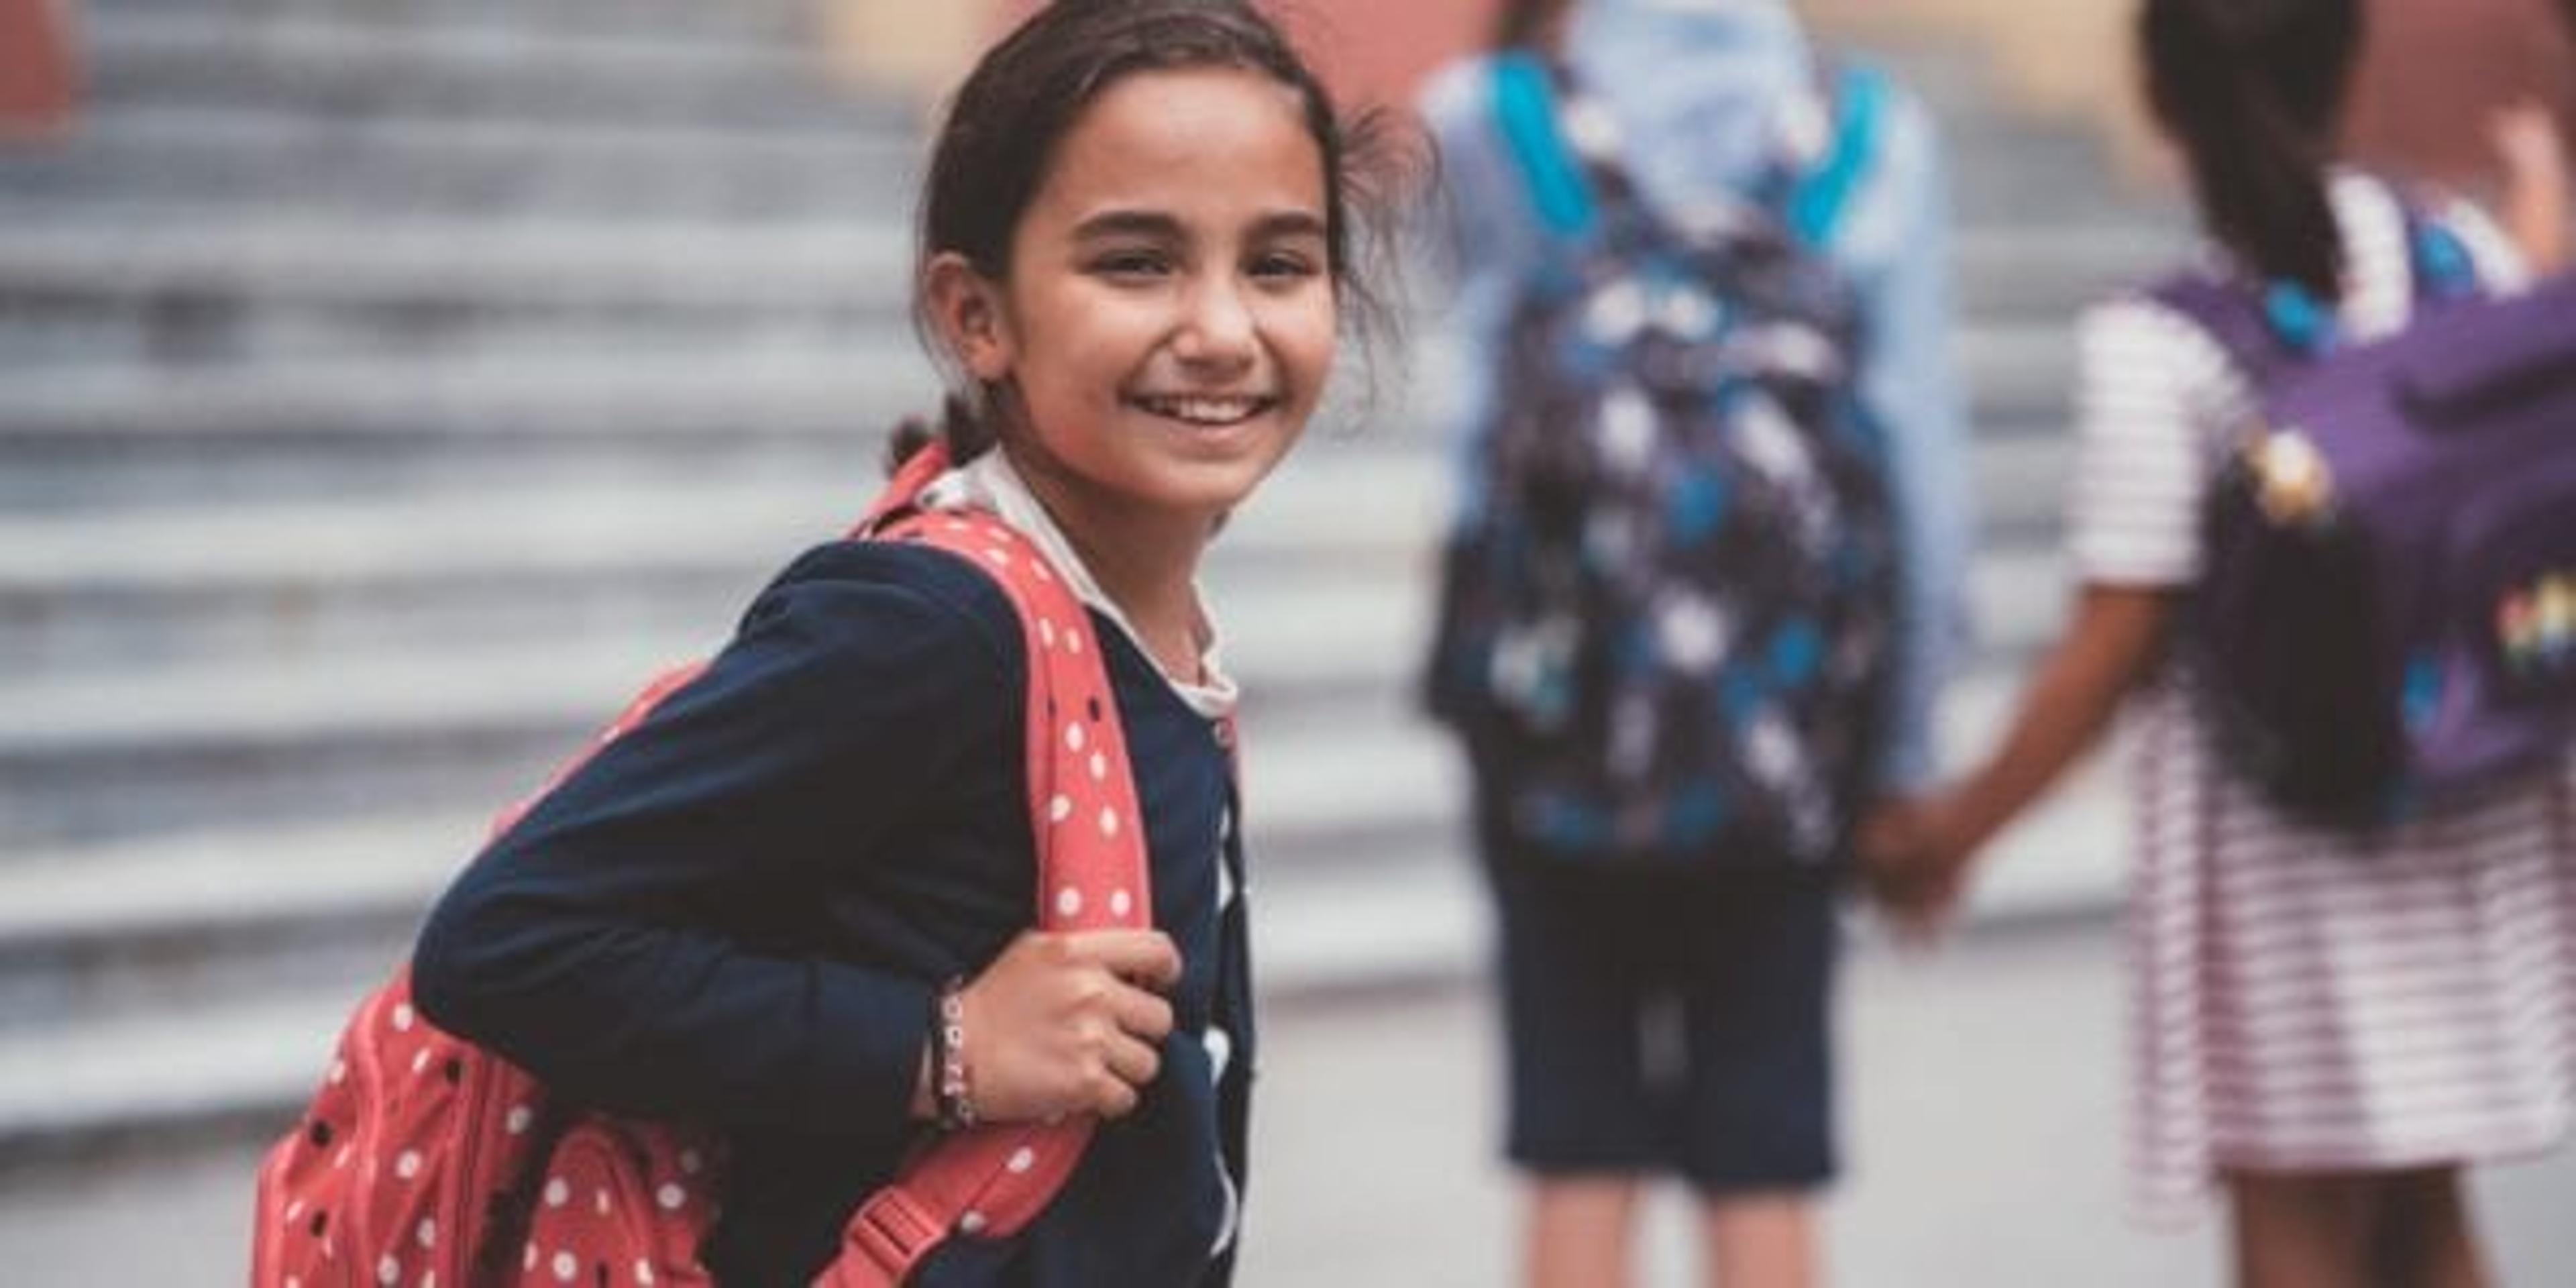 Little girl smiling on her first day of school